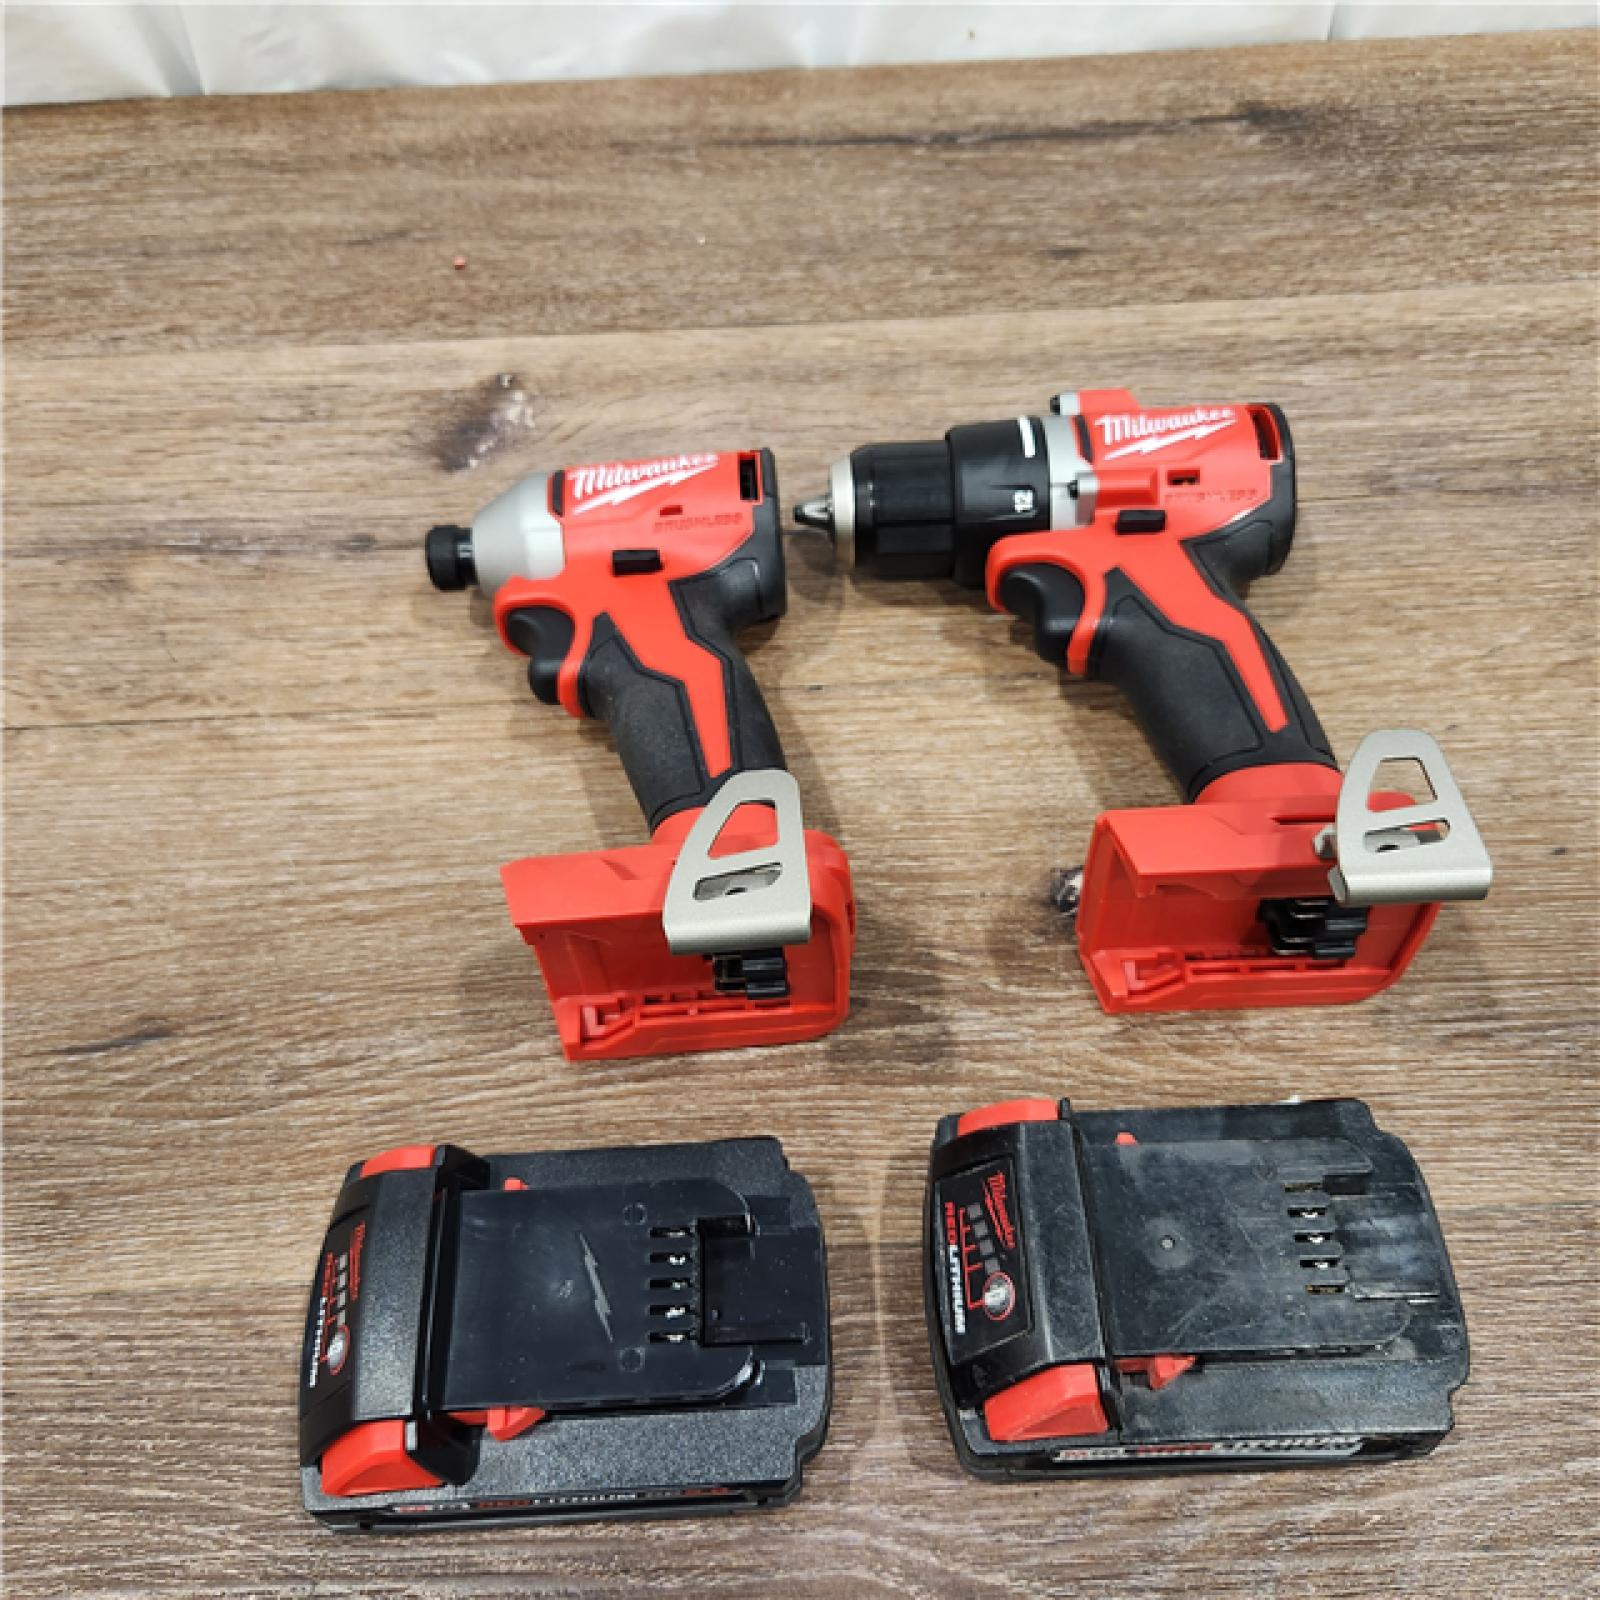 AS-IS M18 18V Lithium-Ion Brushless Cordless Compact Drill/Impact Combo Kit (2-Tool) W/(2) 2.0 Ah Batteries, Charger & Bag